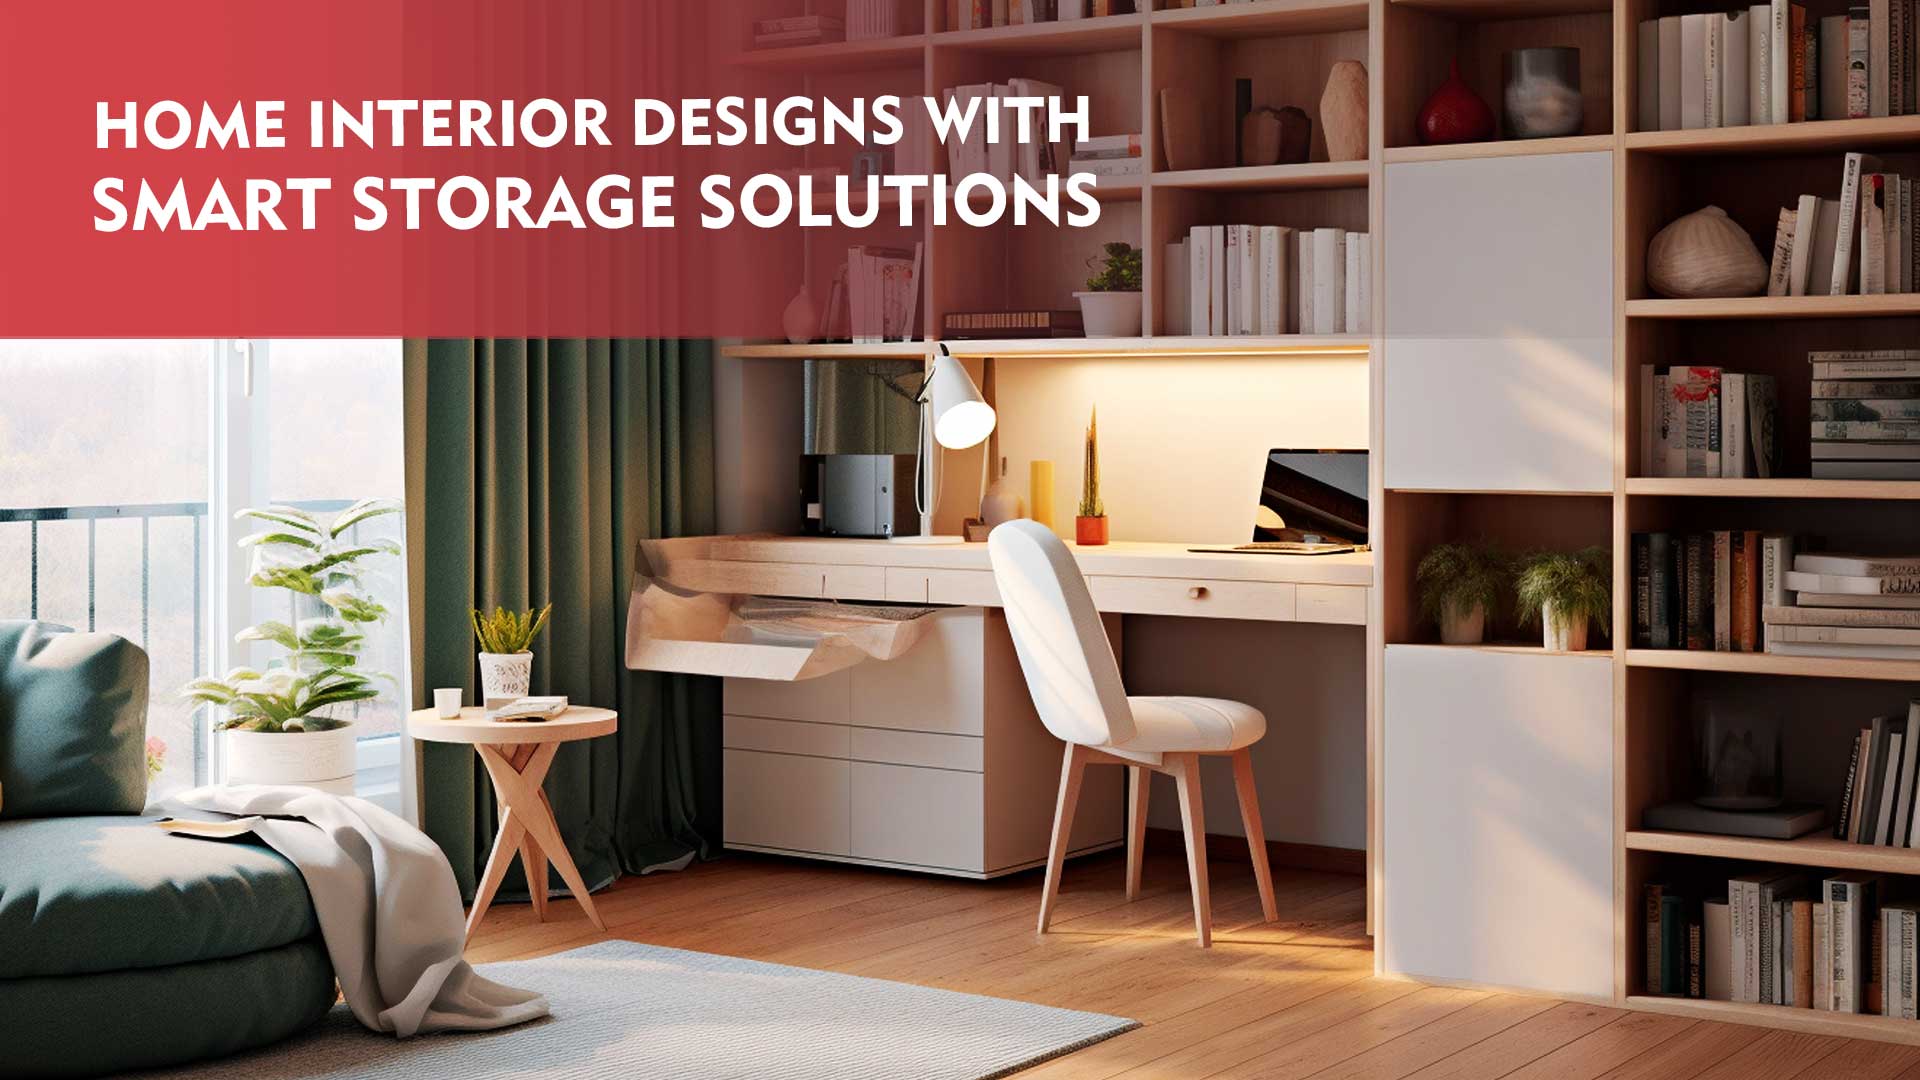 Smart Storage Solutions - Organize and Declutter